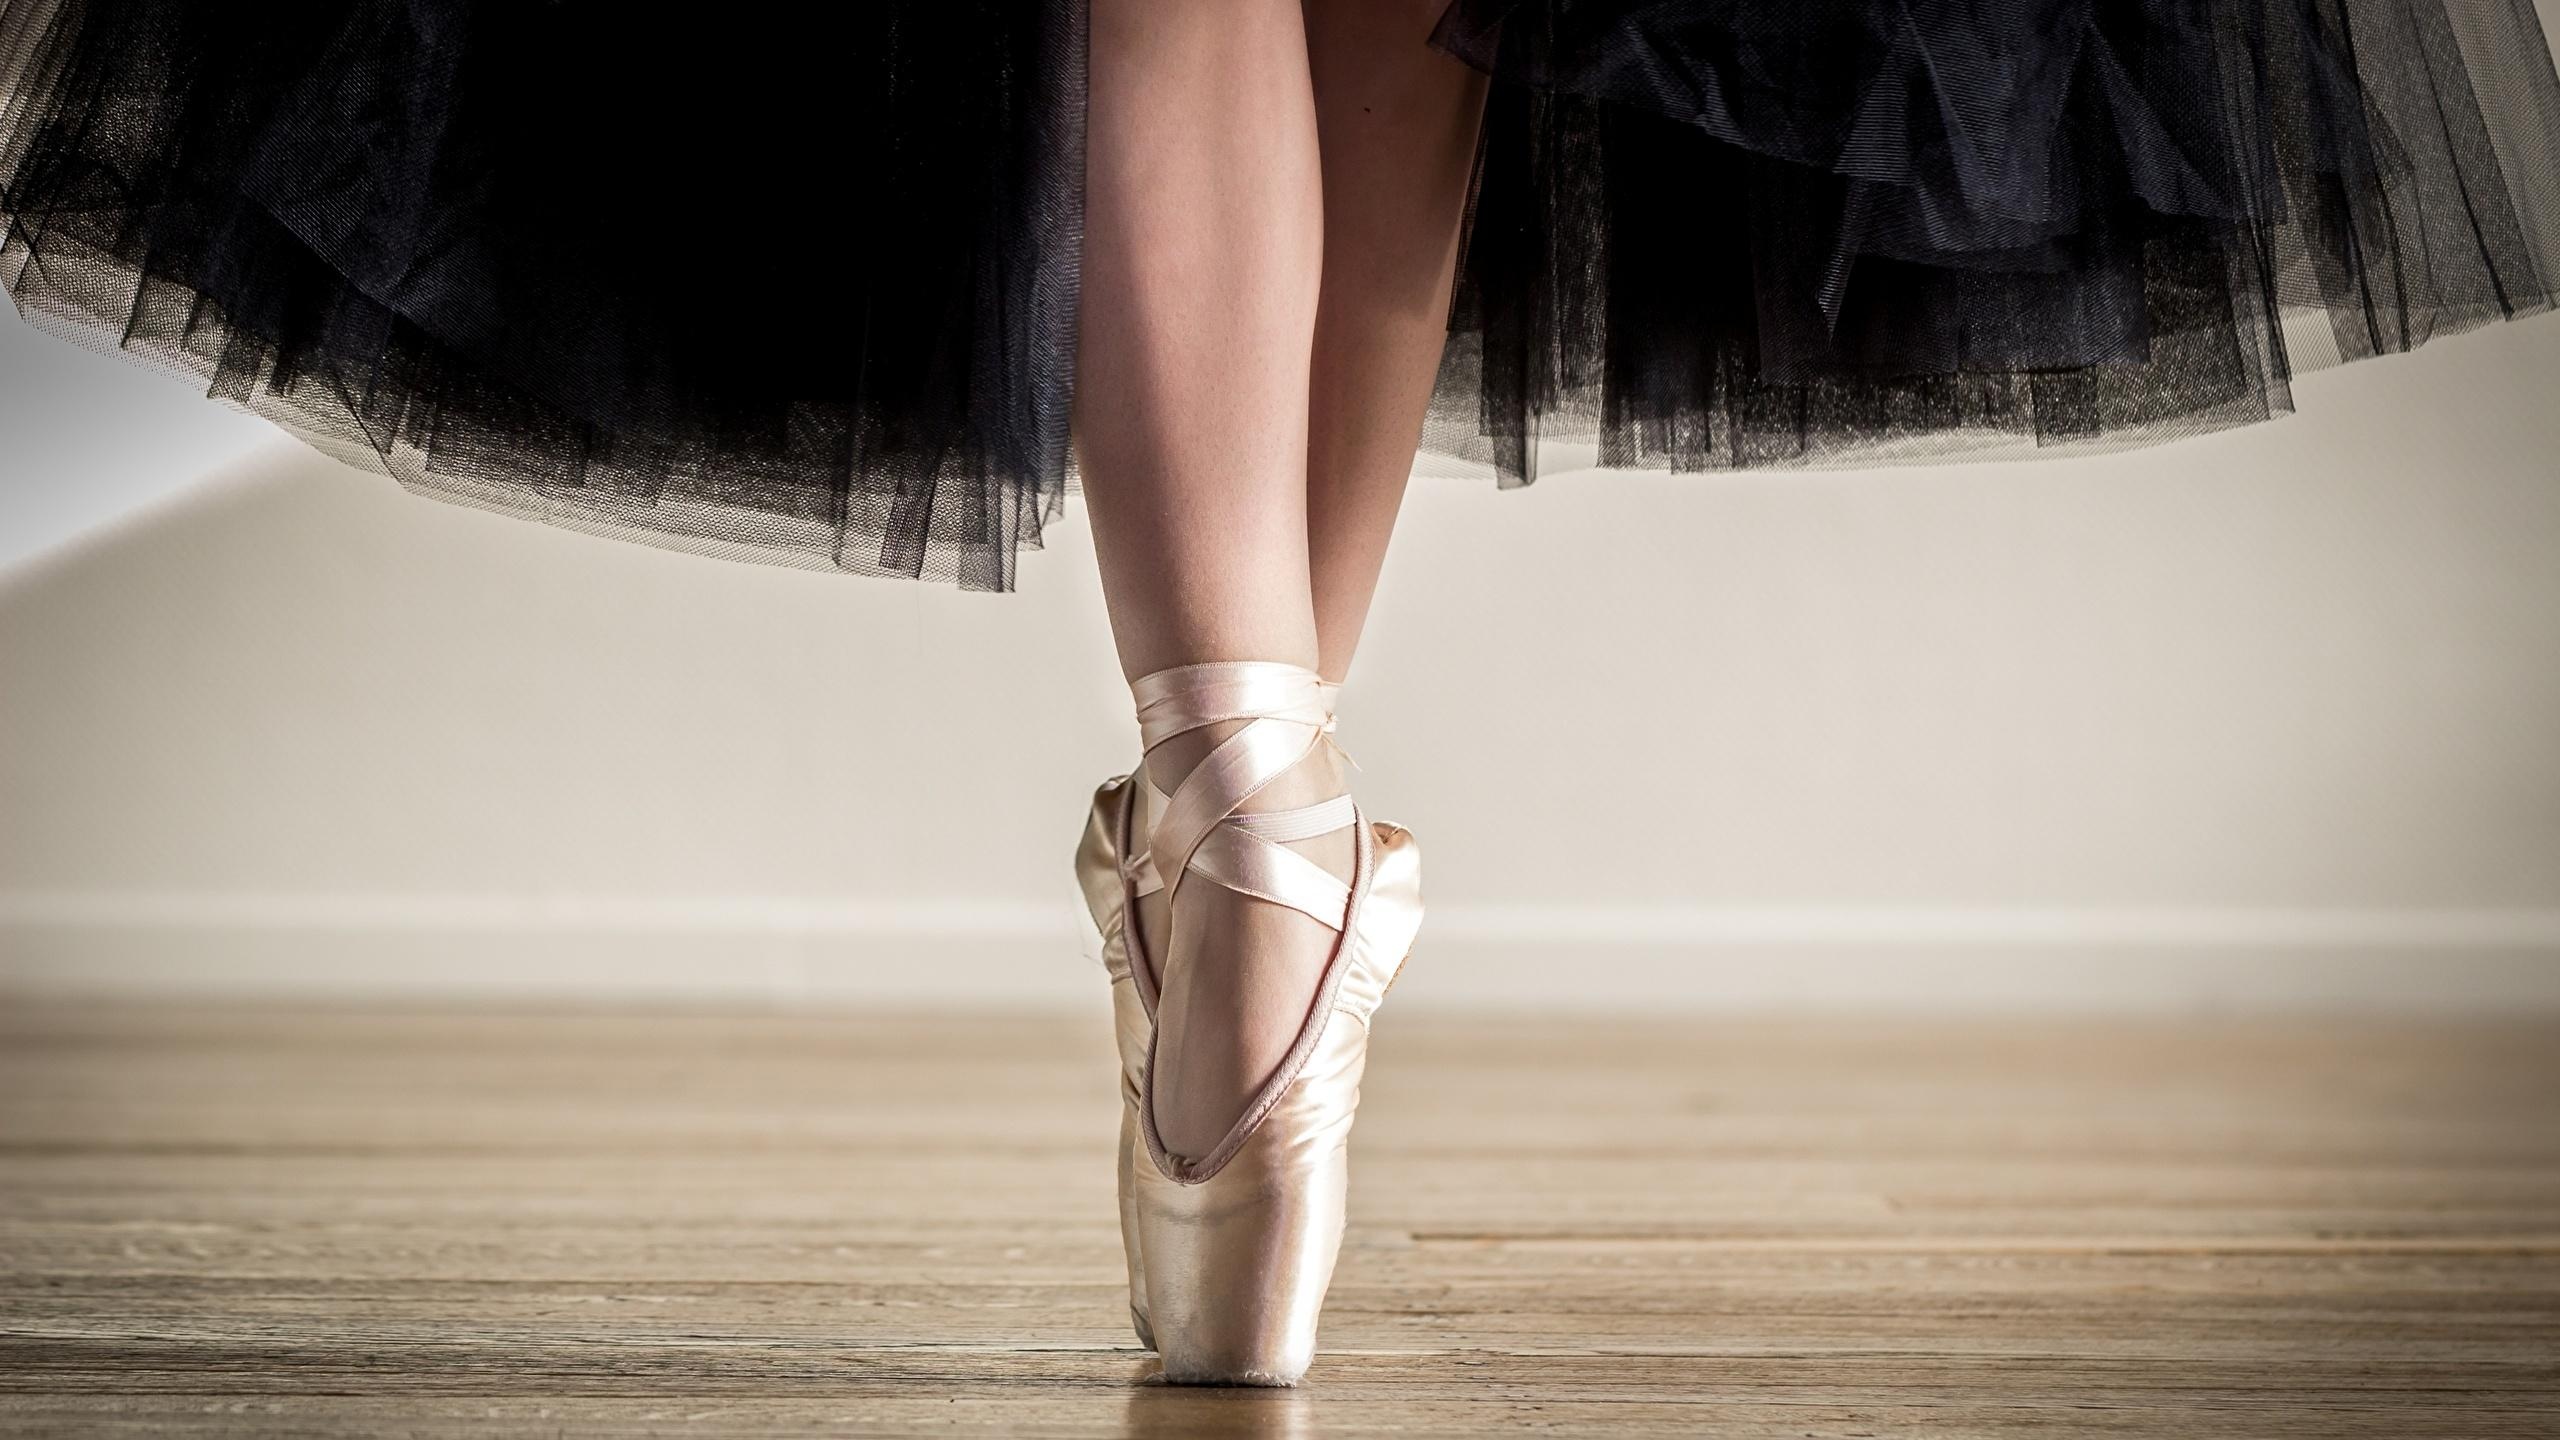 Ballet: Dancers moving gracefully on the tips of their toes, En pointe. 2560x1440 HD Wallpaper.